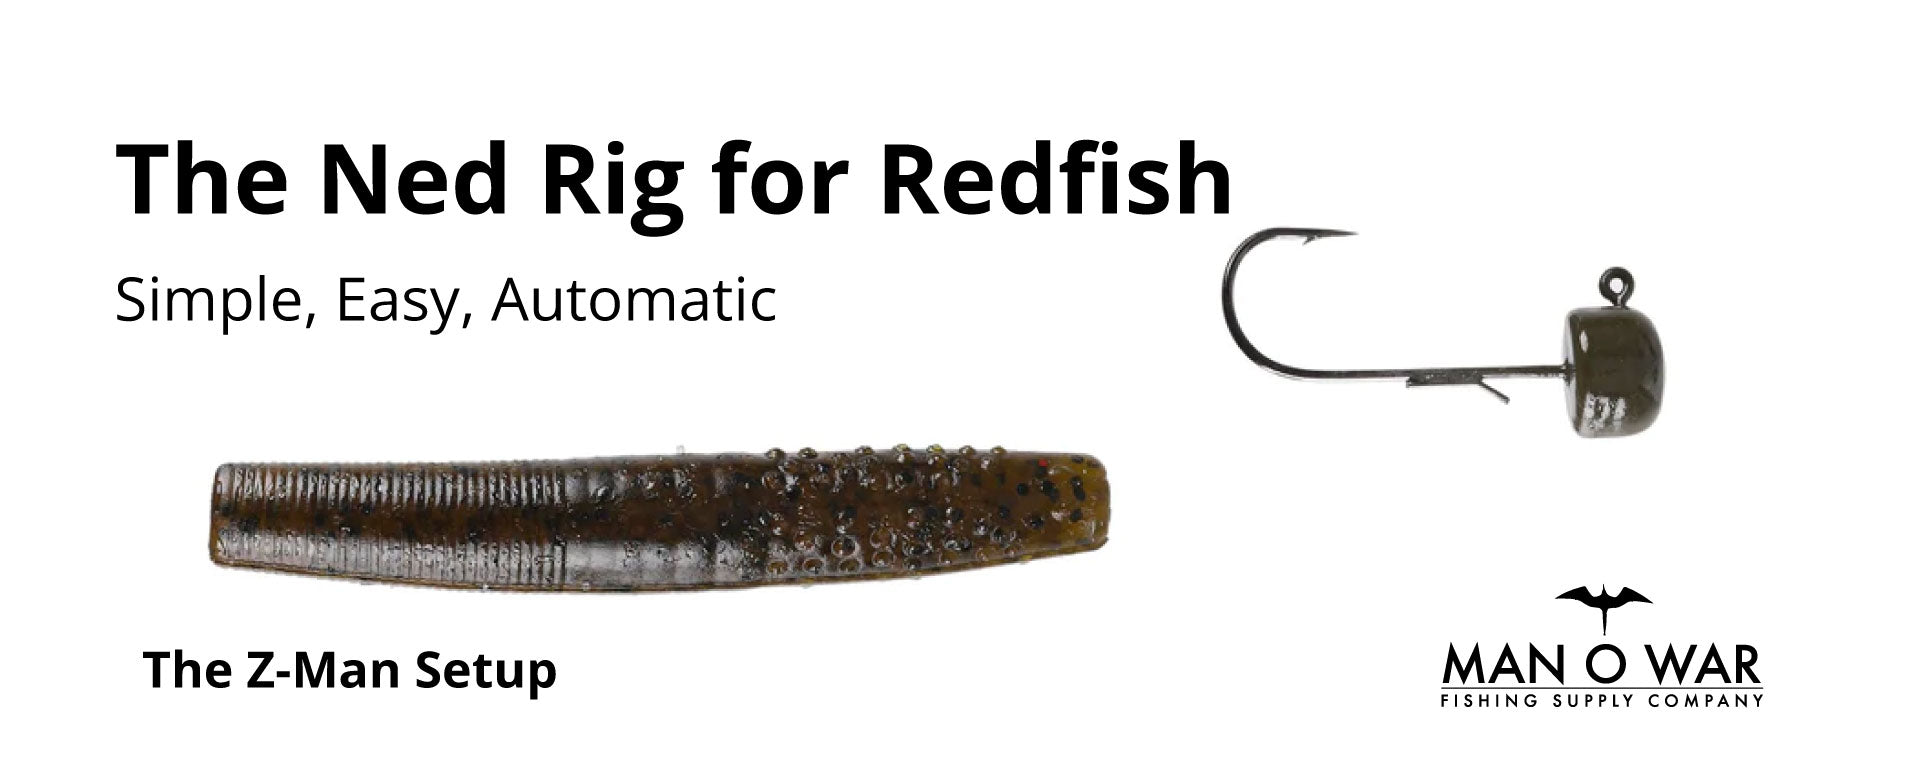 Ned rigging for winter bass 